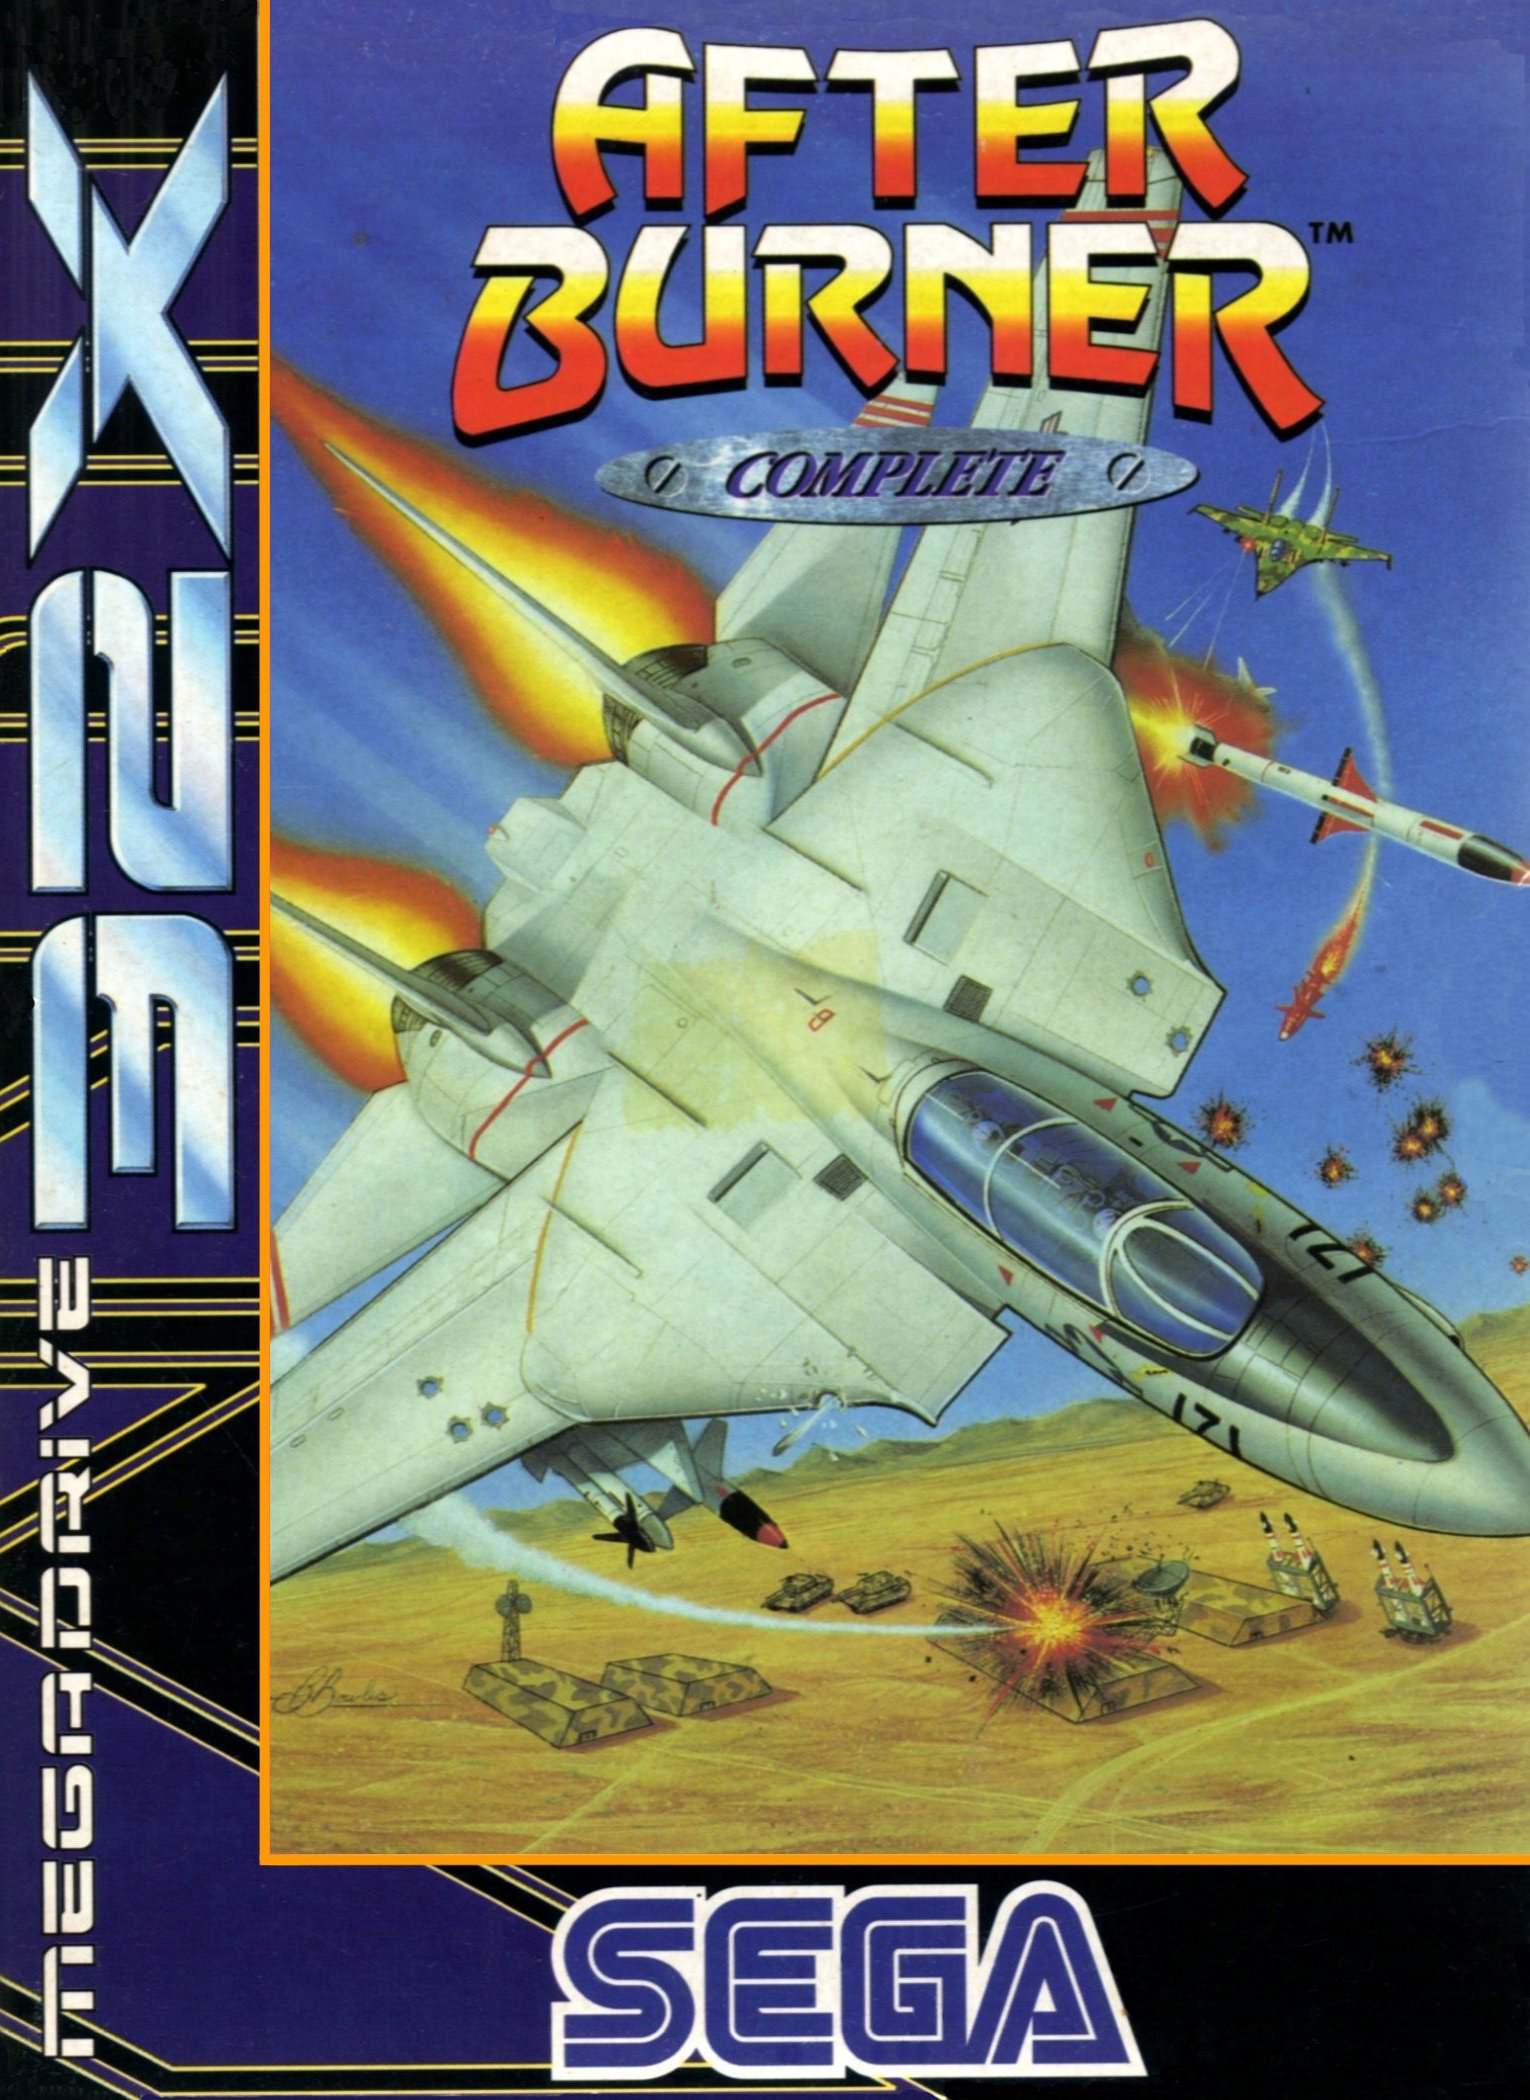 After burner complete miro for mac